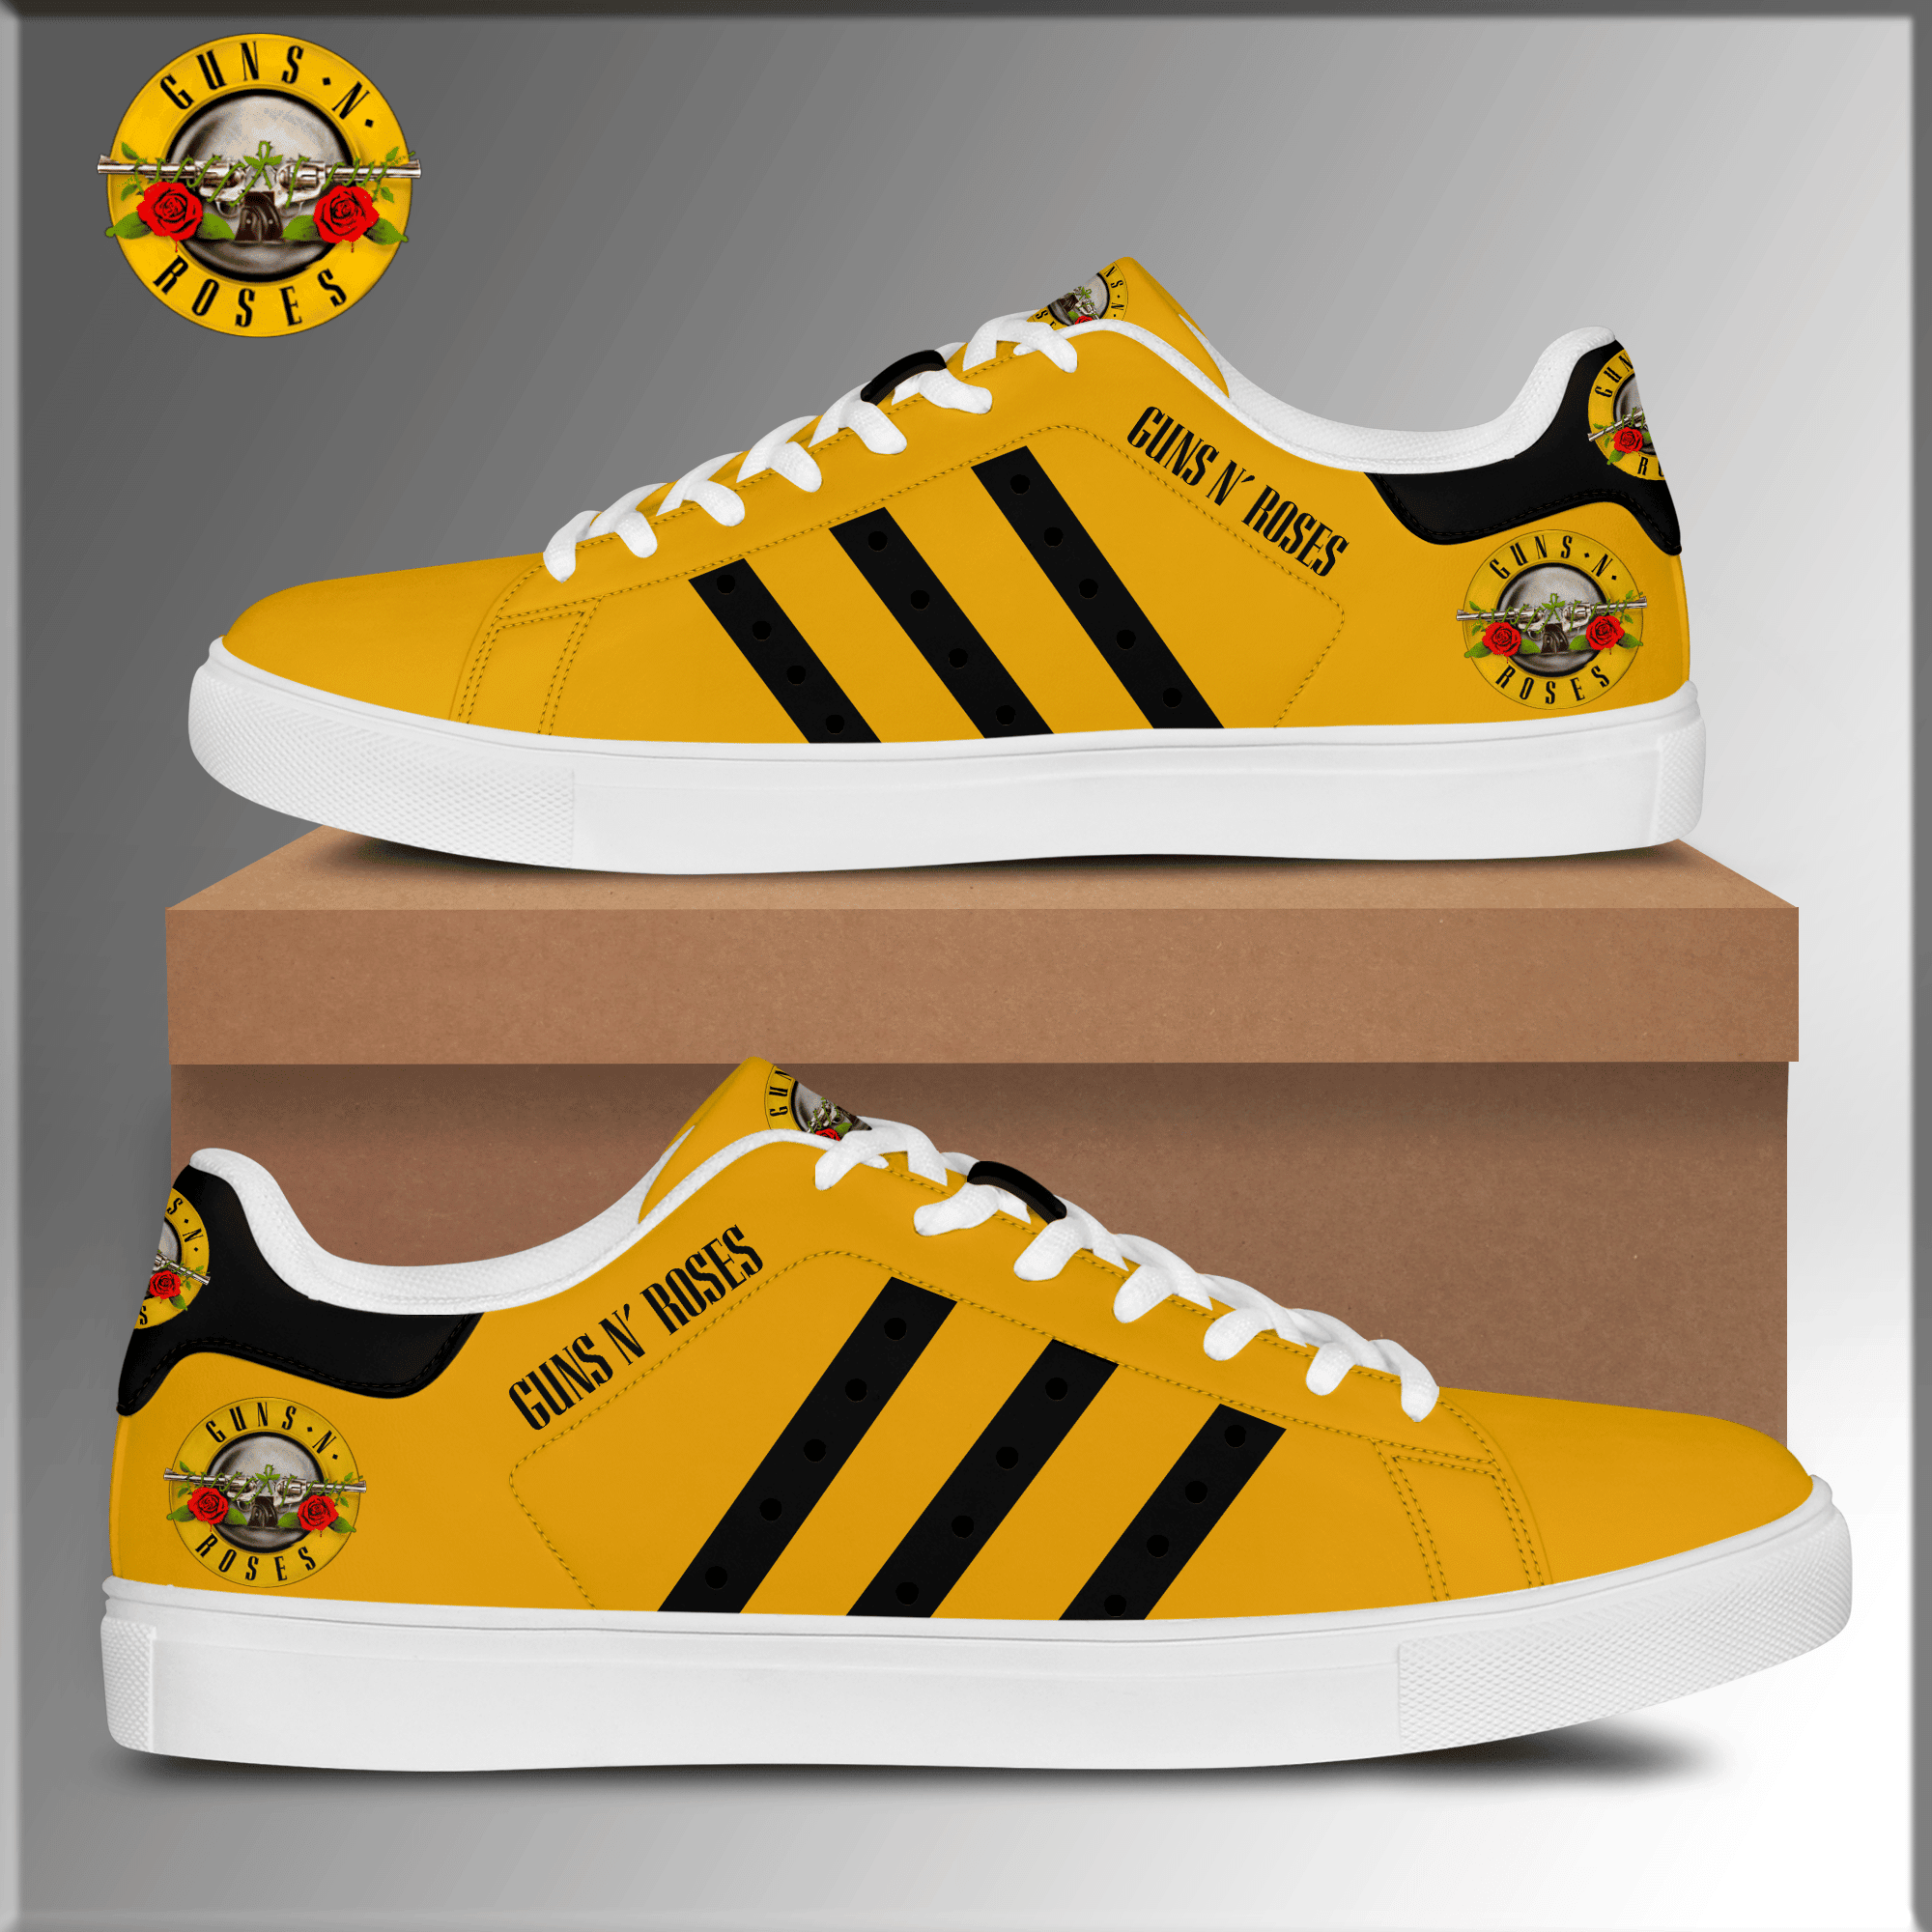 Guns N' Roses St Smith Shoes Ver 9